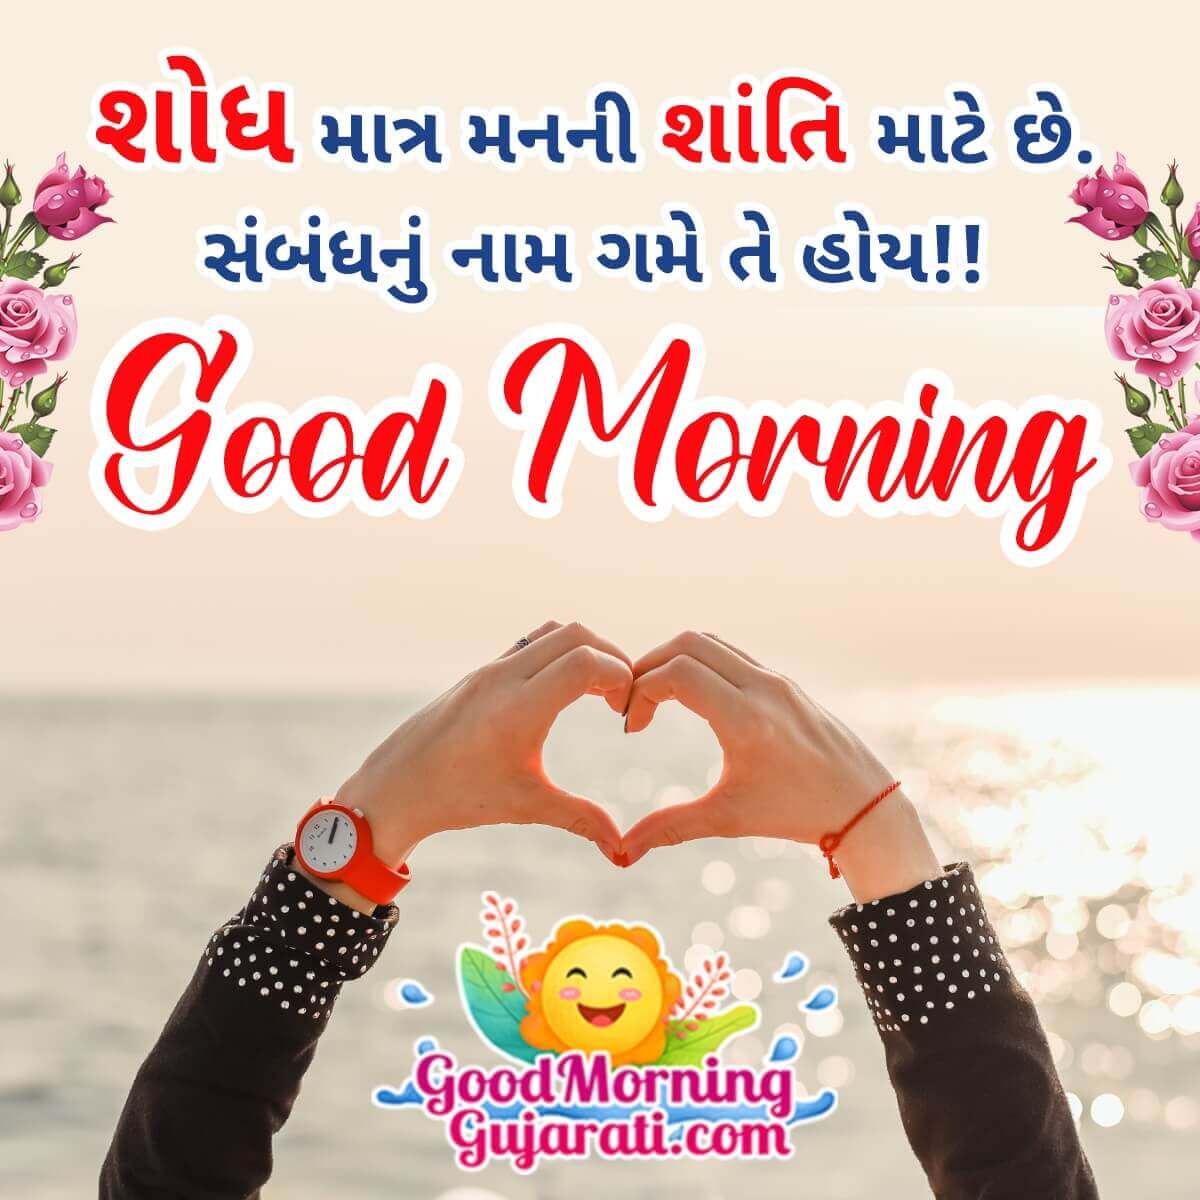 Good Morning Gujarati Thoughts Images